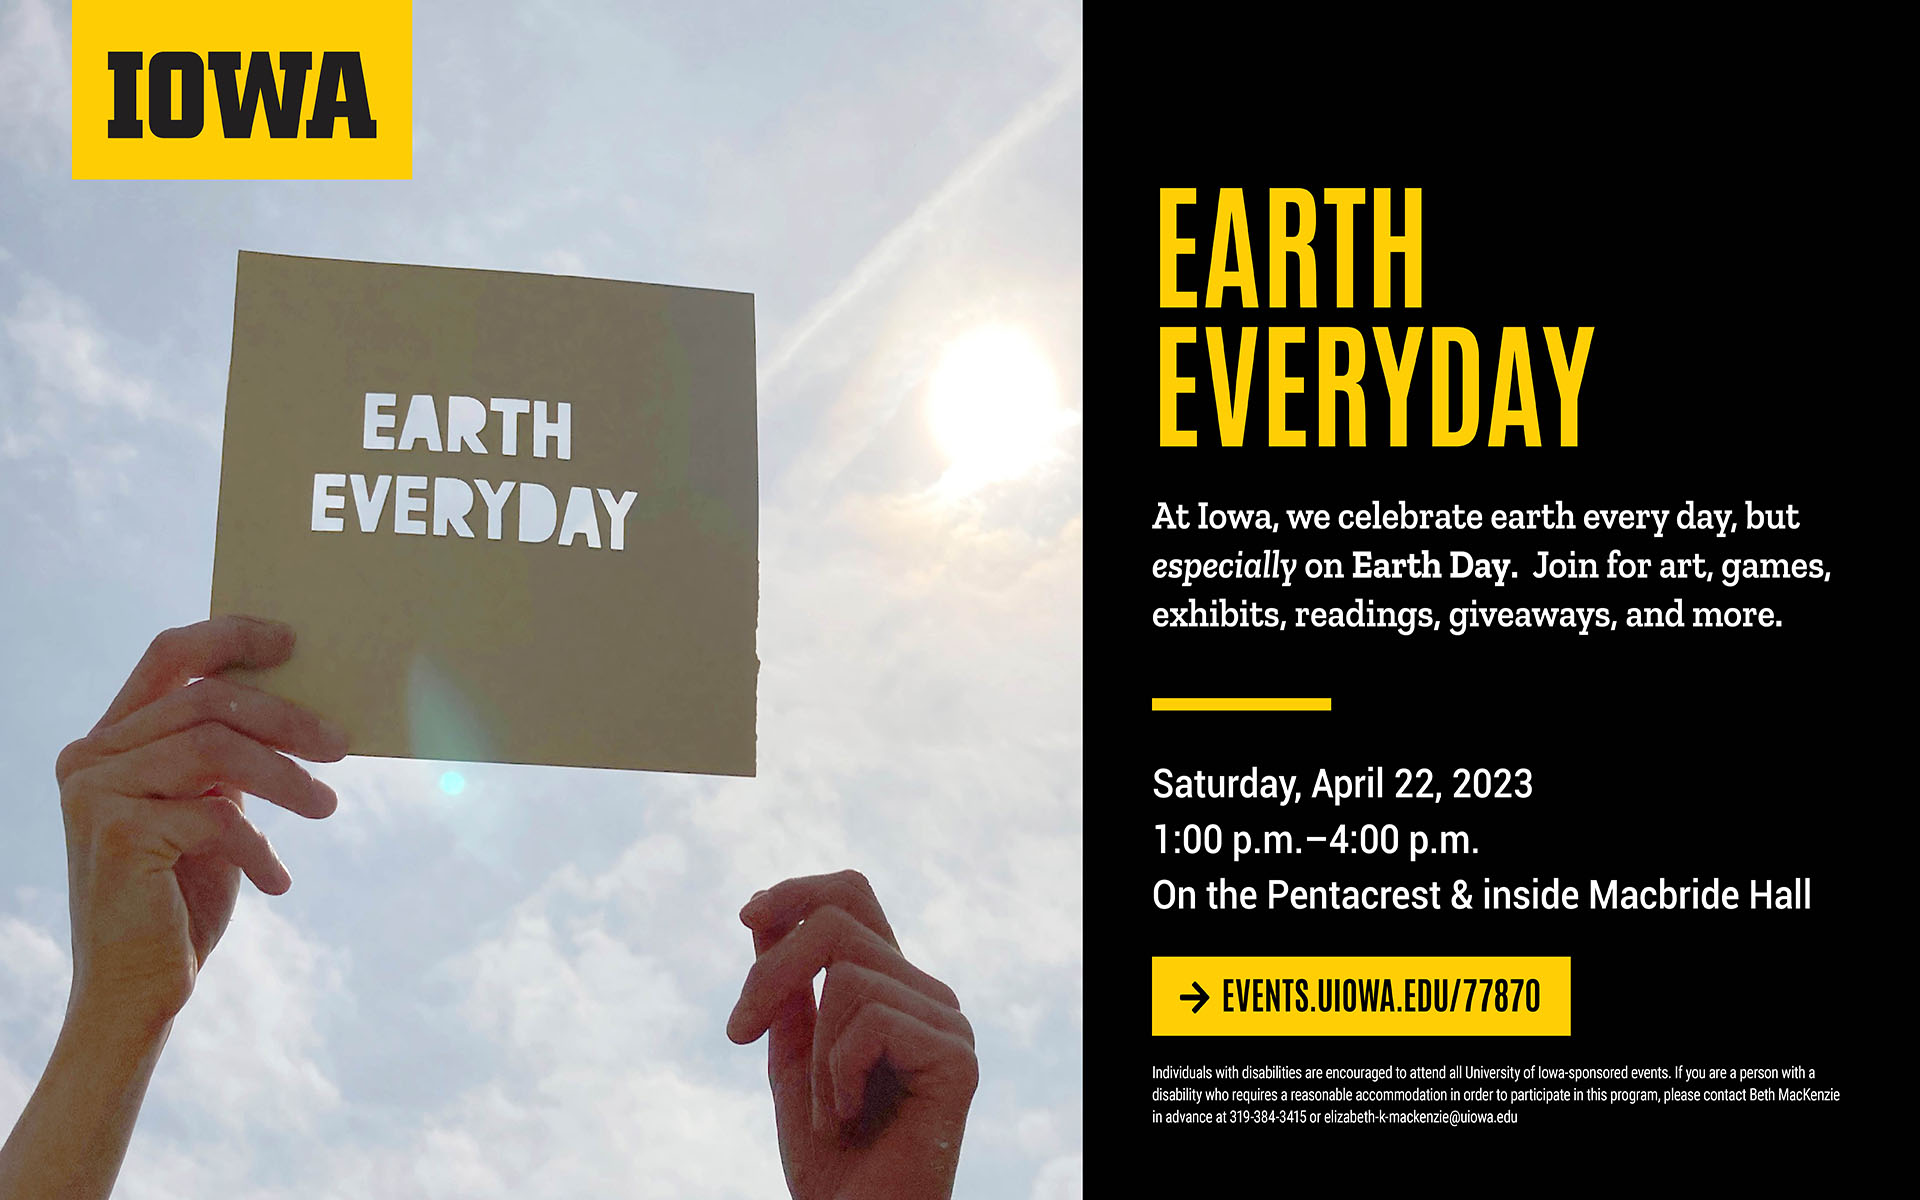 Earth Everday event: Saturday, April 22, 1-4pm on the Pentacrest and inside Macbride Hall